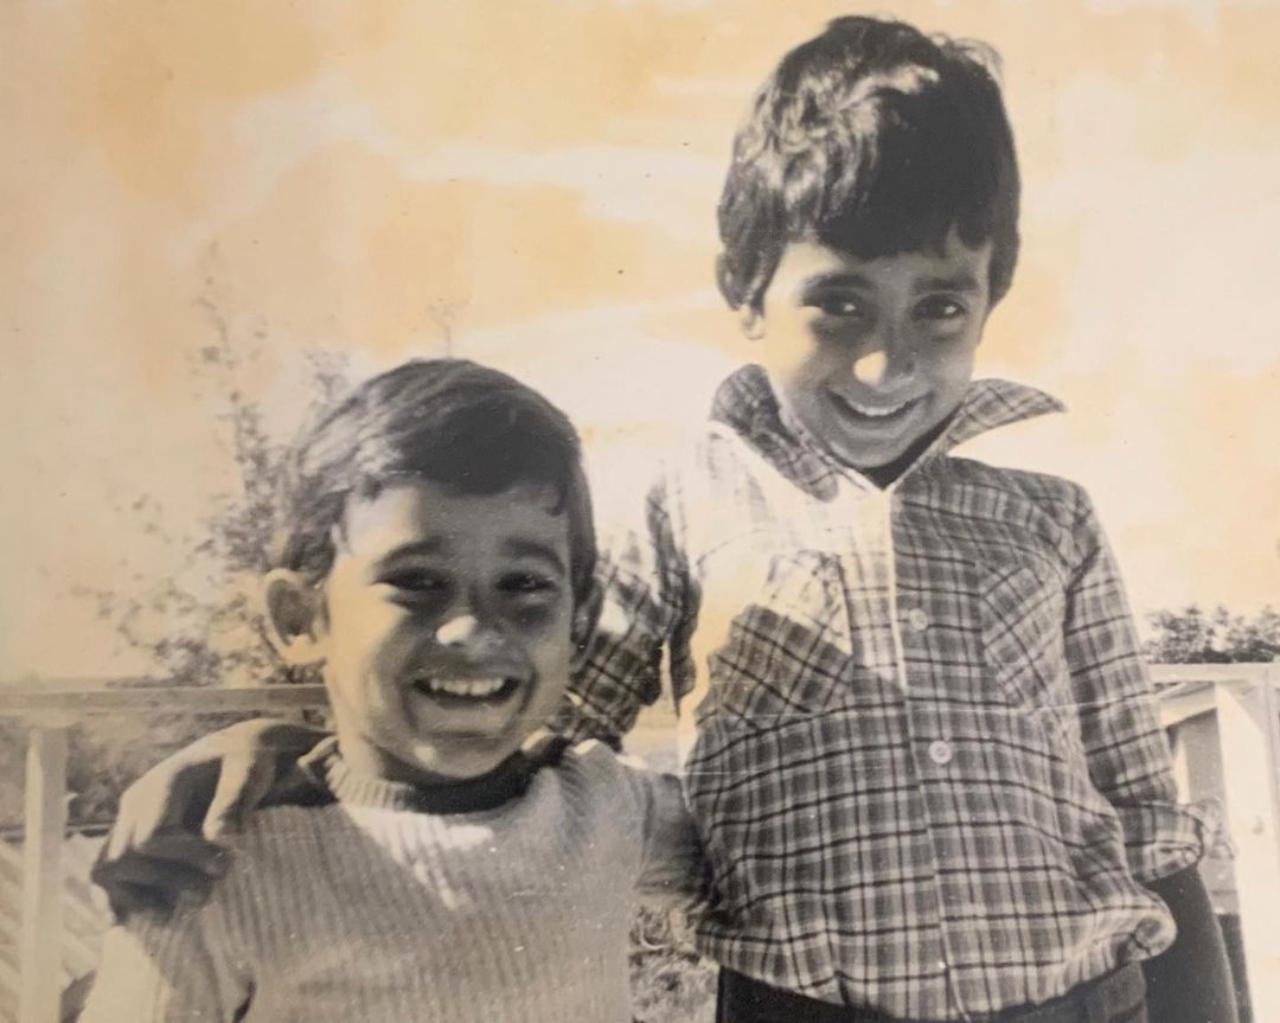 Rahul Khanna took to his Instagram handle and treated fans with this childhood picture of himself and his younger brother Akshaye Khanna